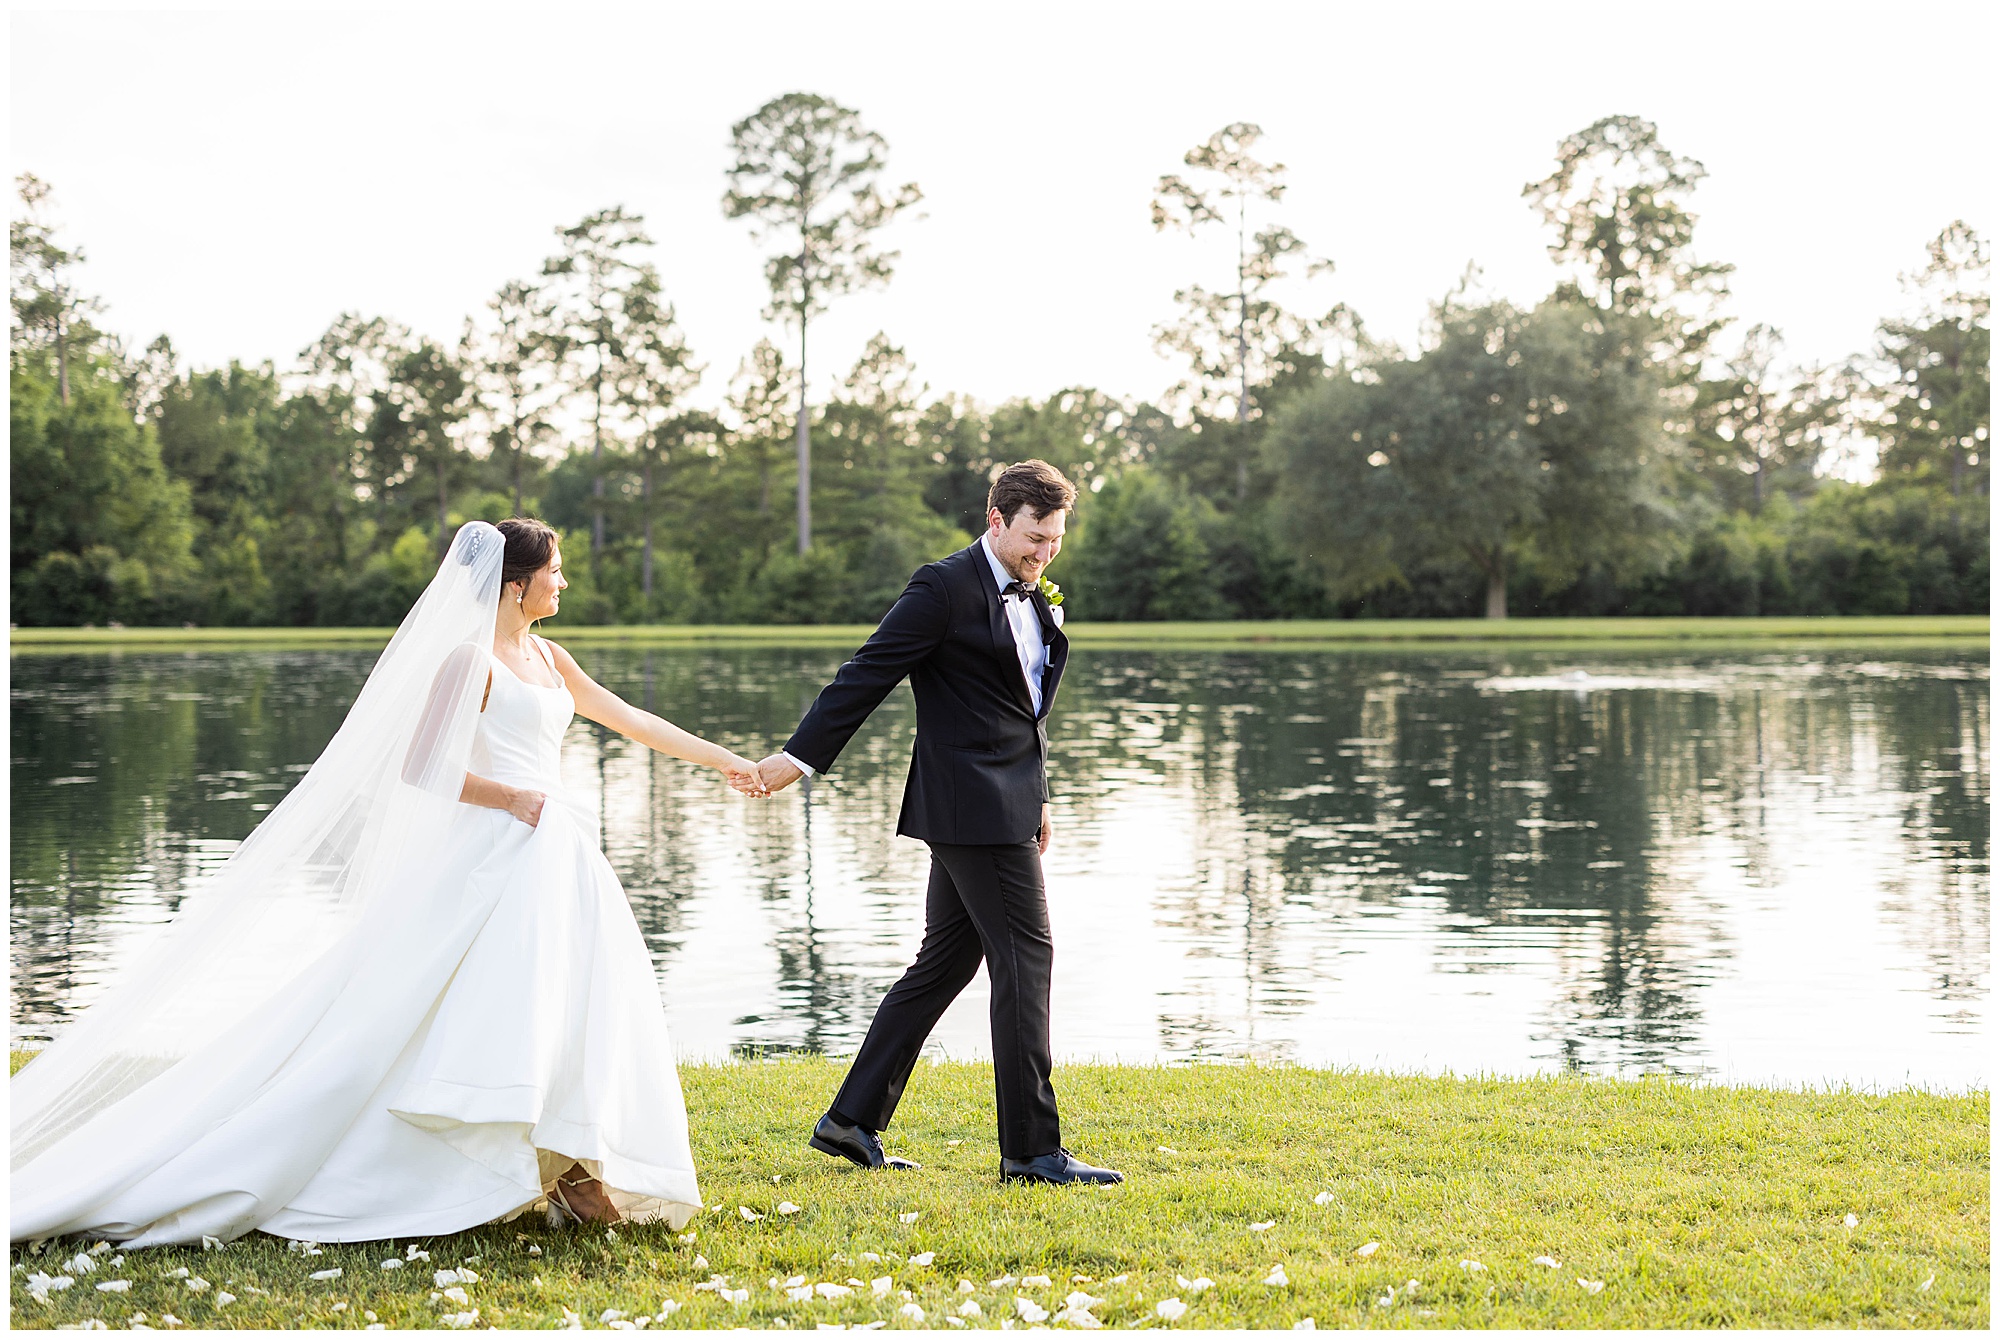 Ask your wedding photographer about their personal photography style!